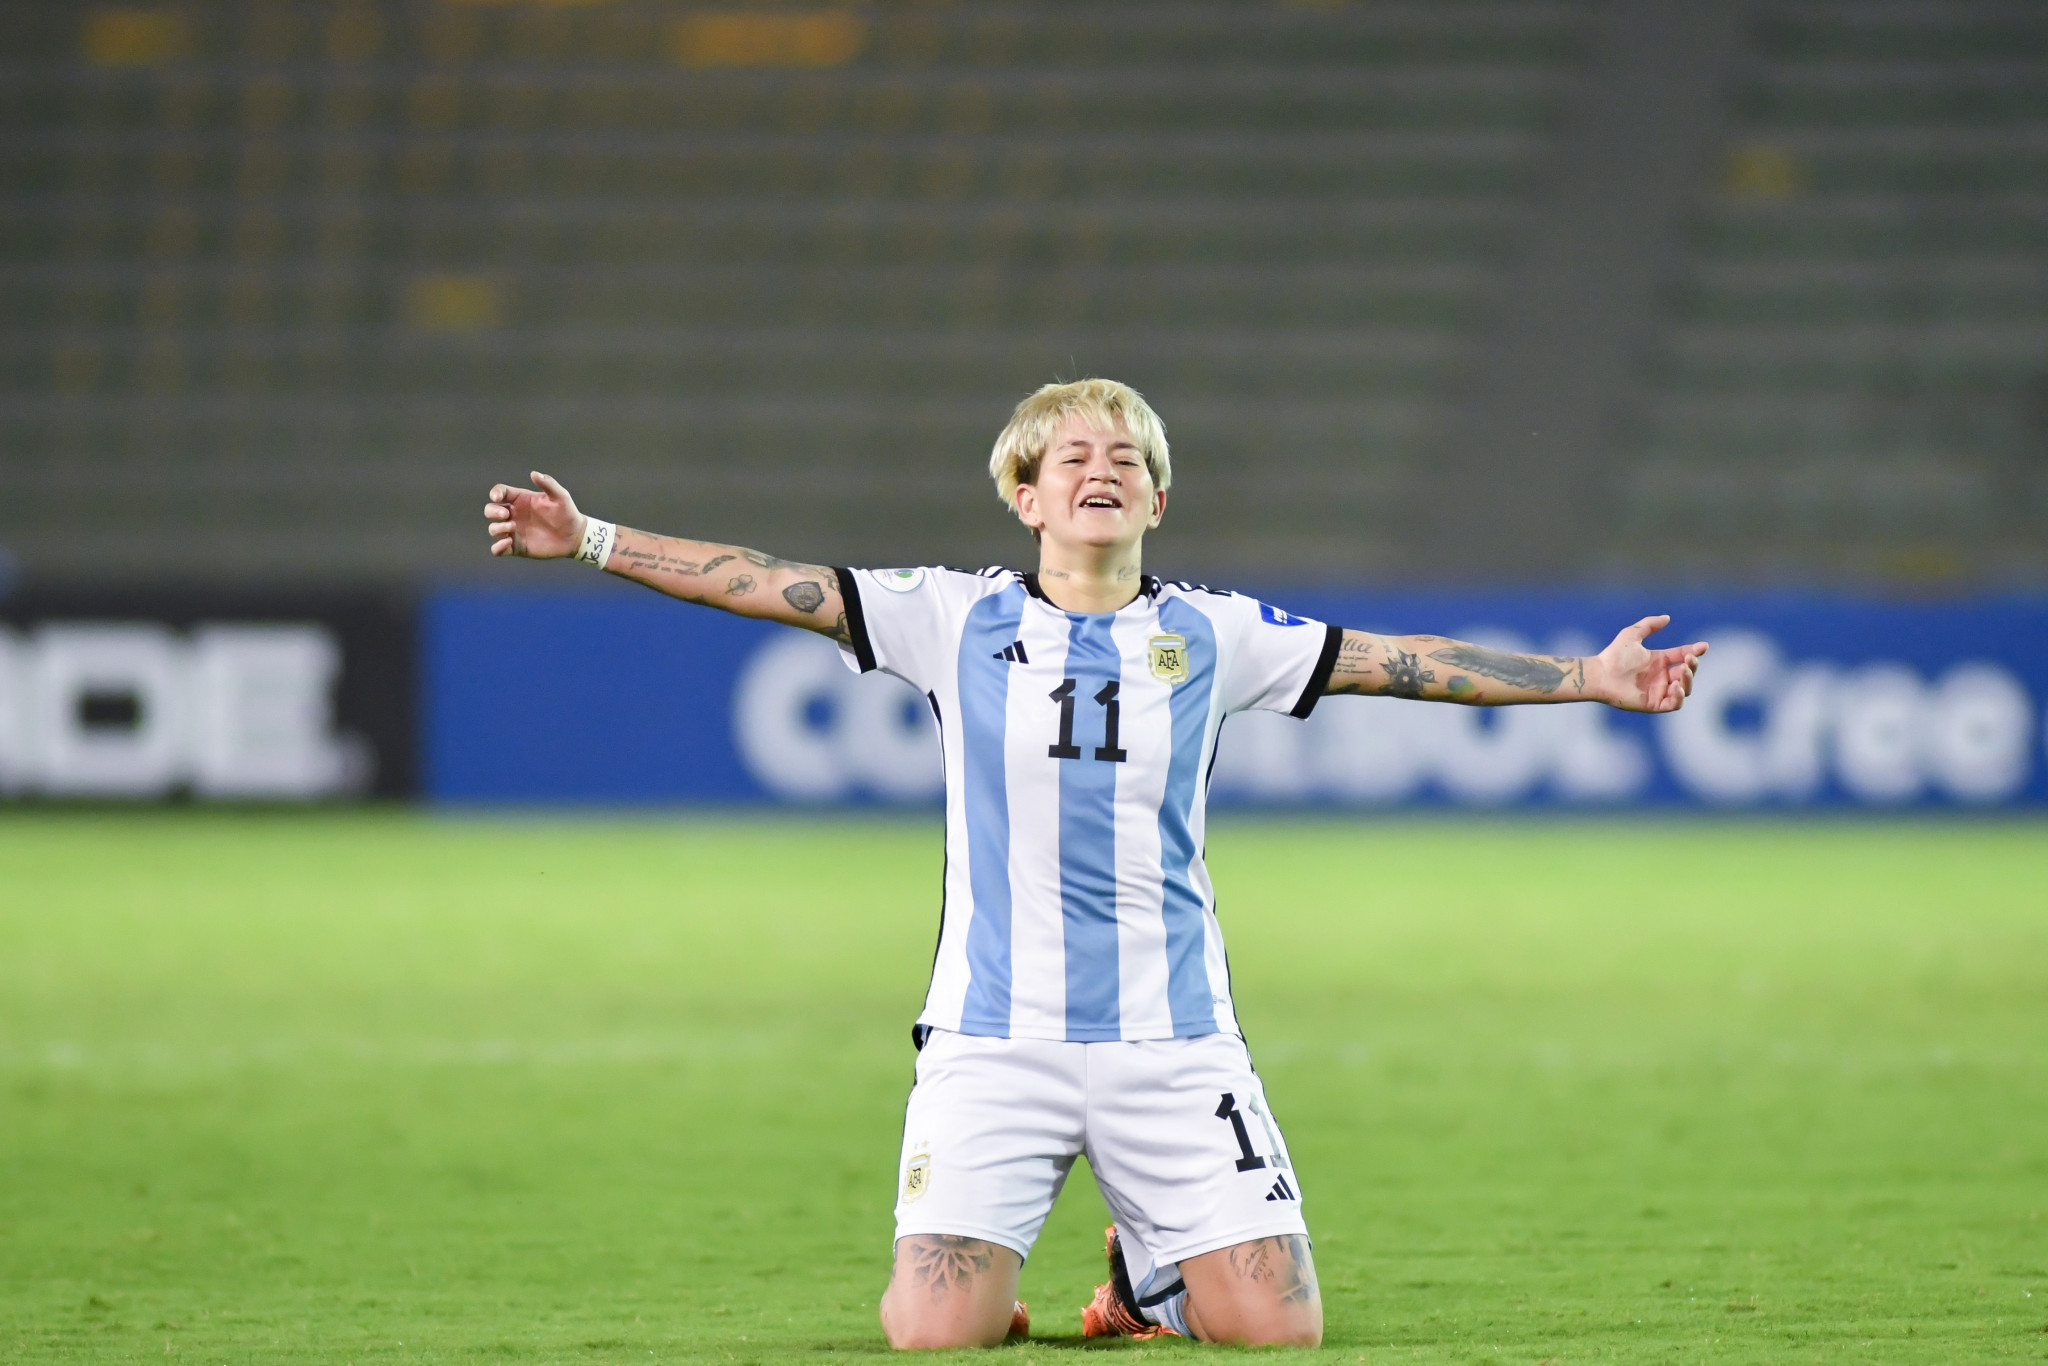 Yamila Rodríguez scored twice in Argentina's victory ©Getty Images